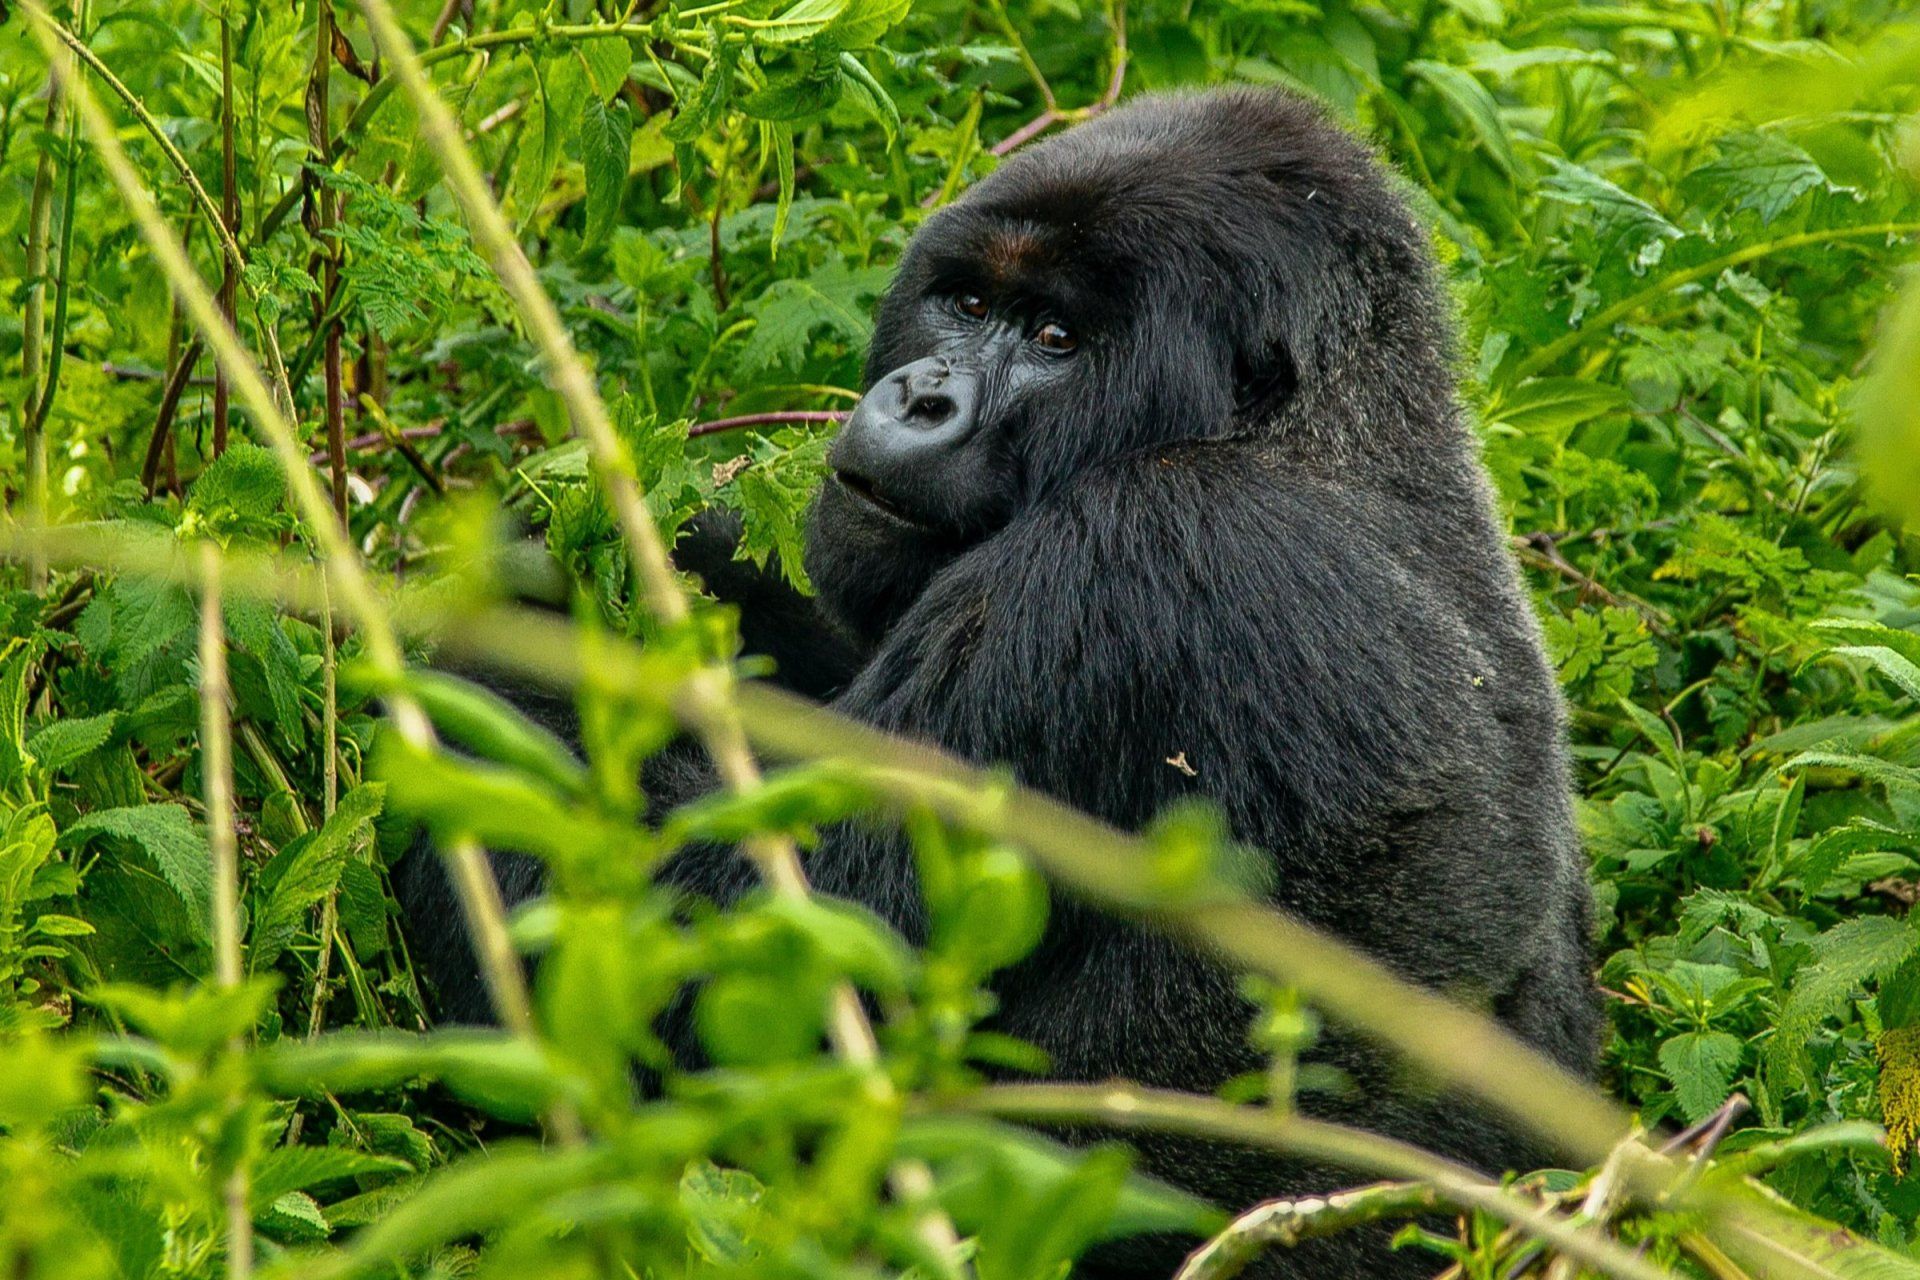 a gorilla is sitting in a lush green forest